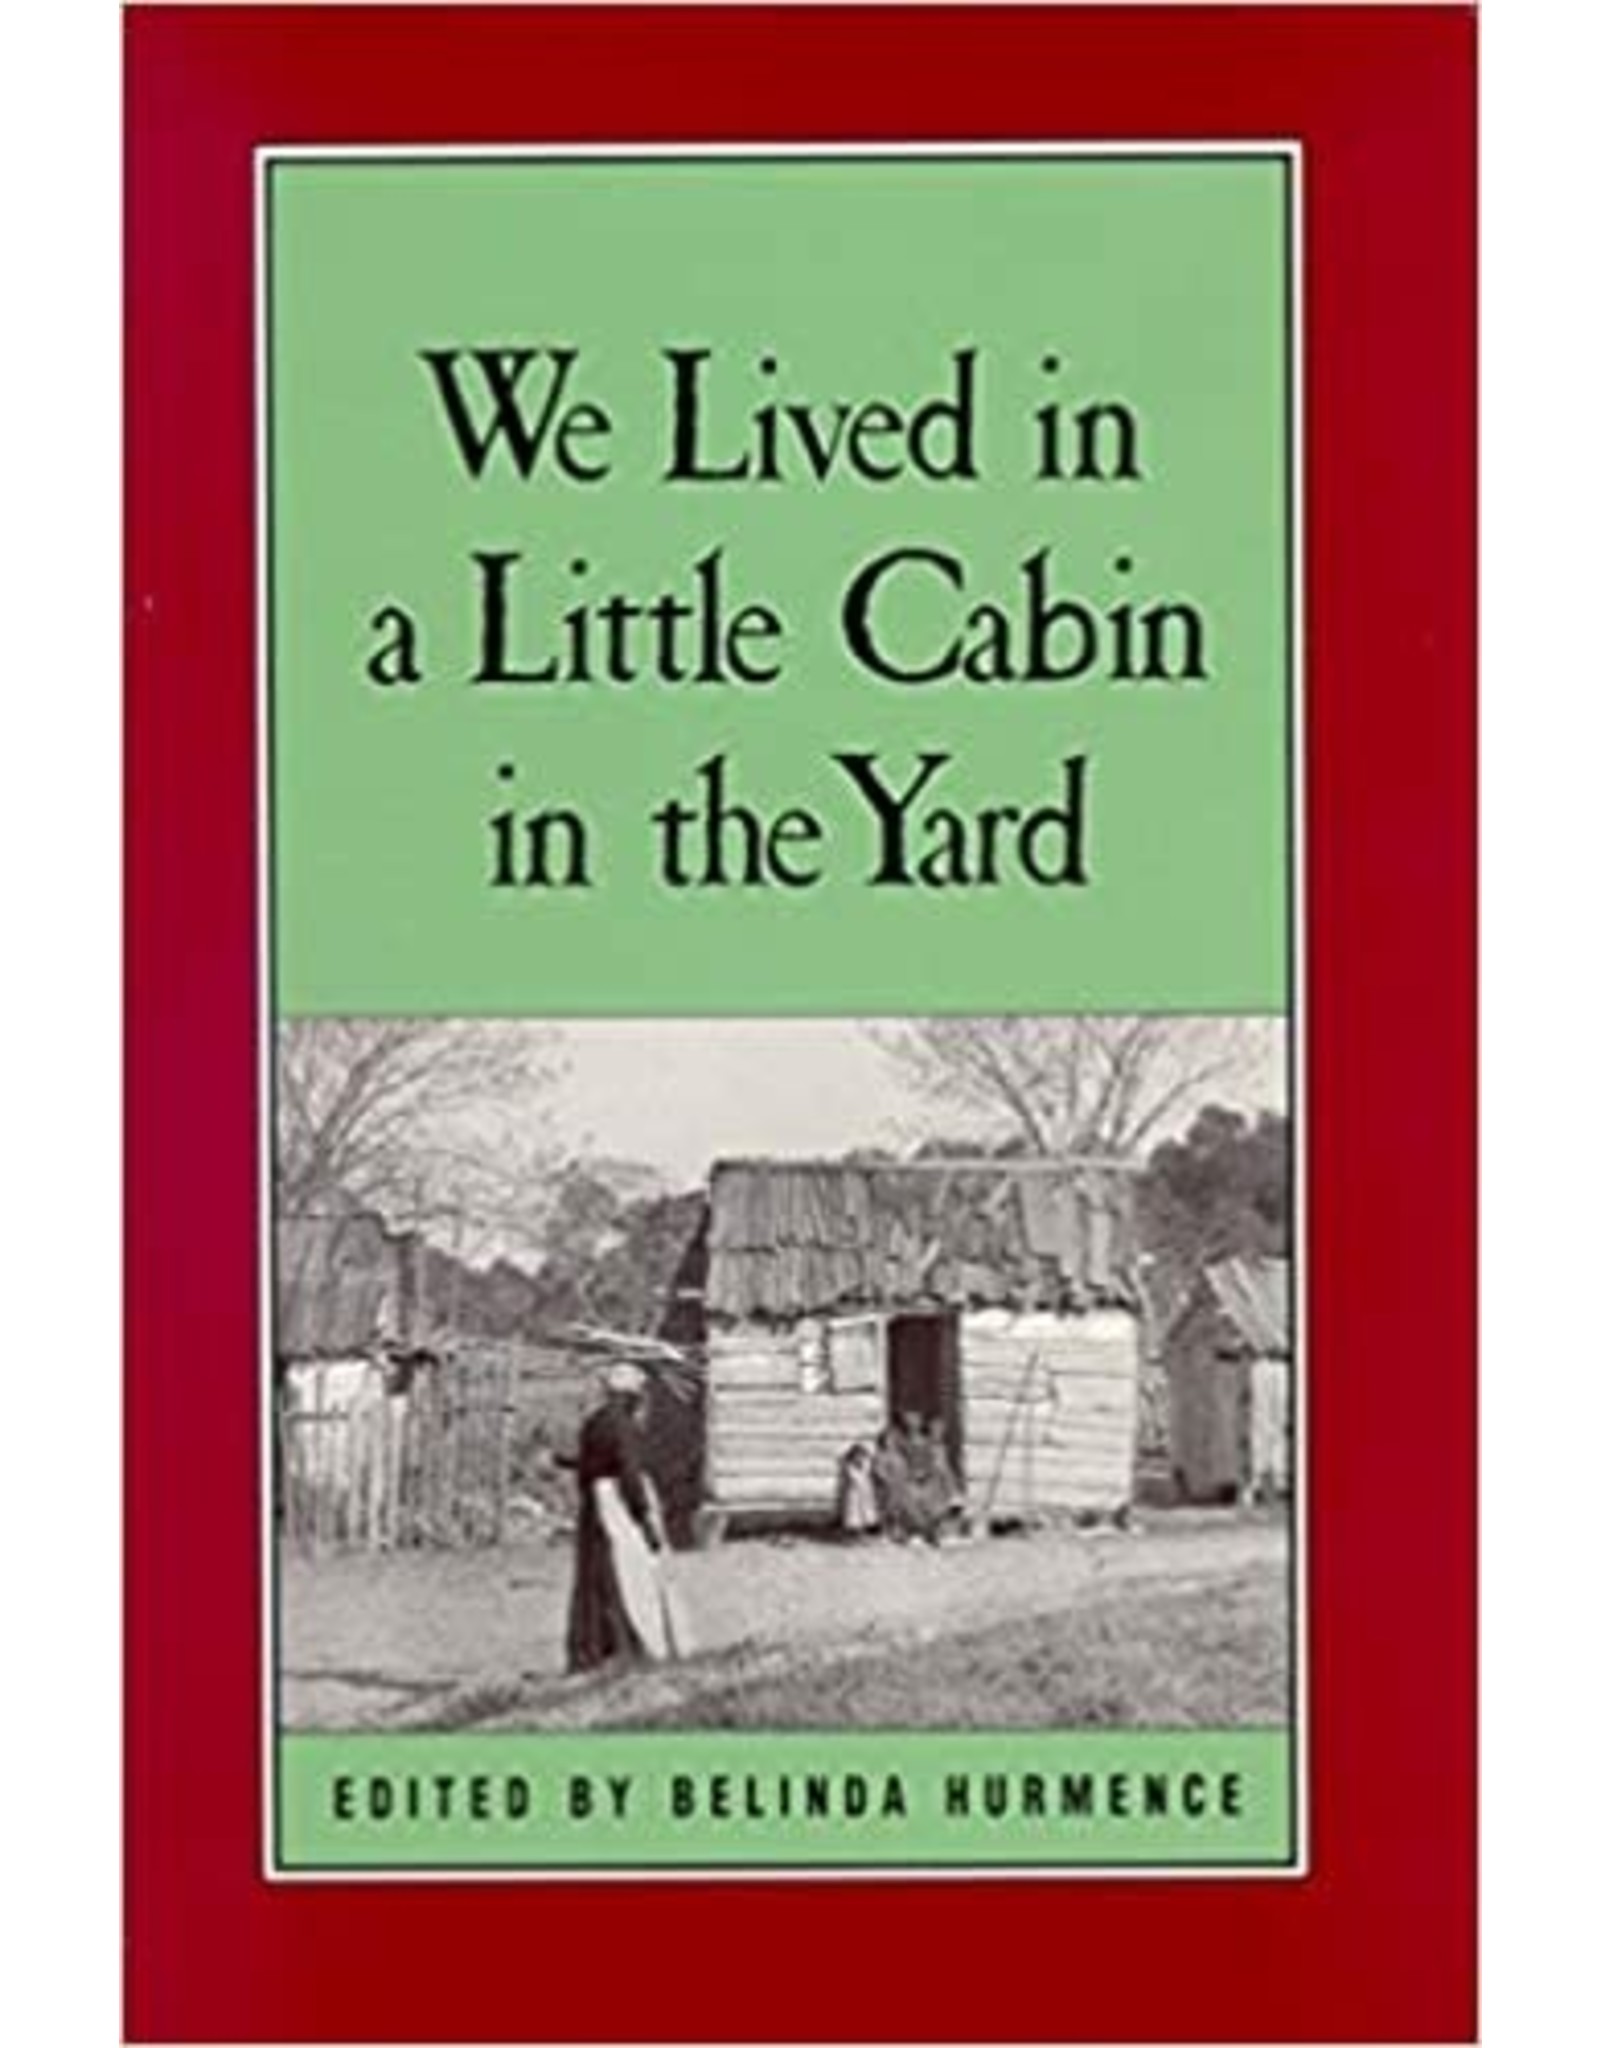 Non-Fiction: Slave Narratives We Lived in a Little Cabin in the Yard: Personal Accounts of Slavery in Virginia